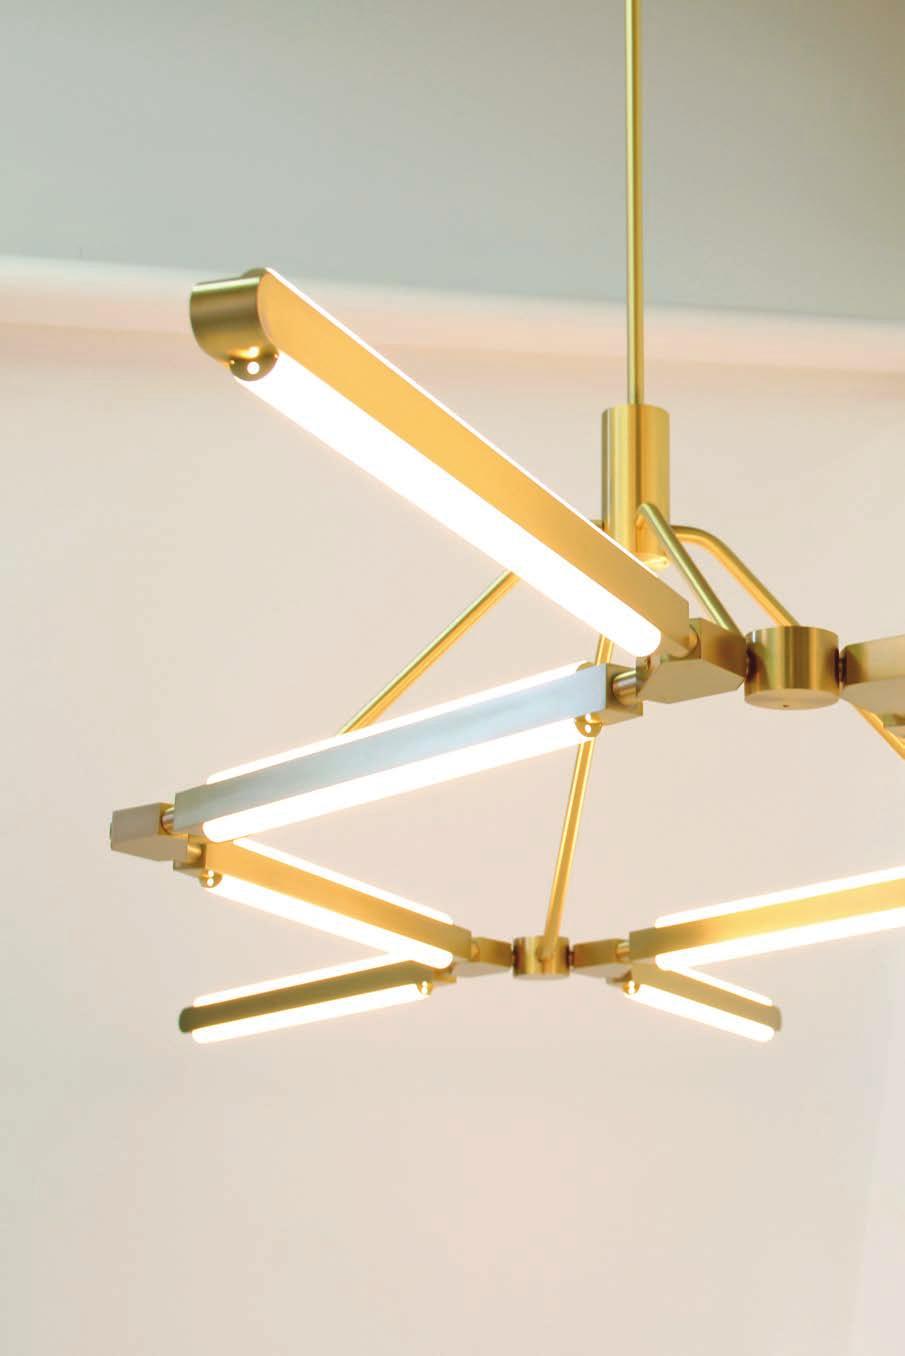 PRIS COLLECTION Pris is an all modular lighting system that can be configured in a multitude of simple or complex